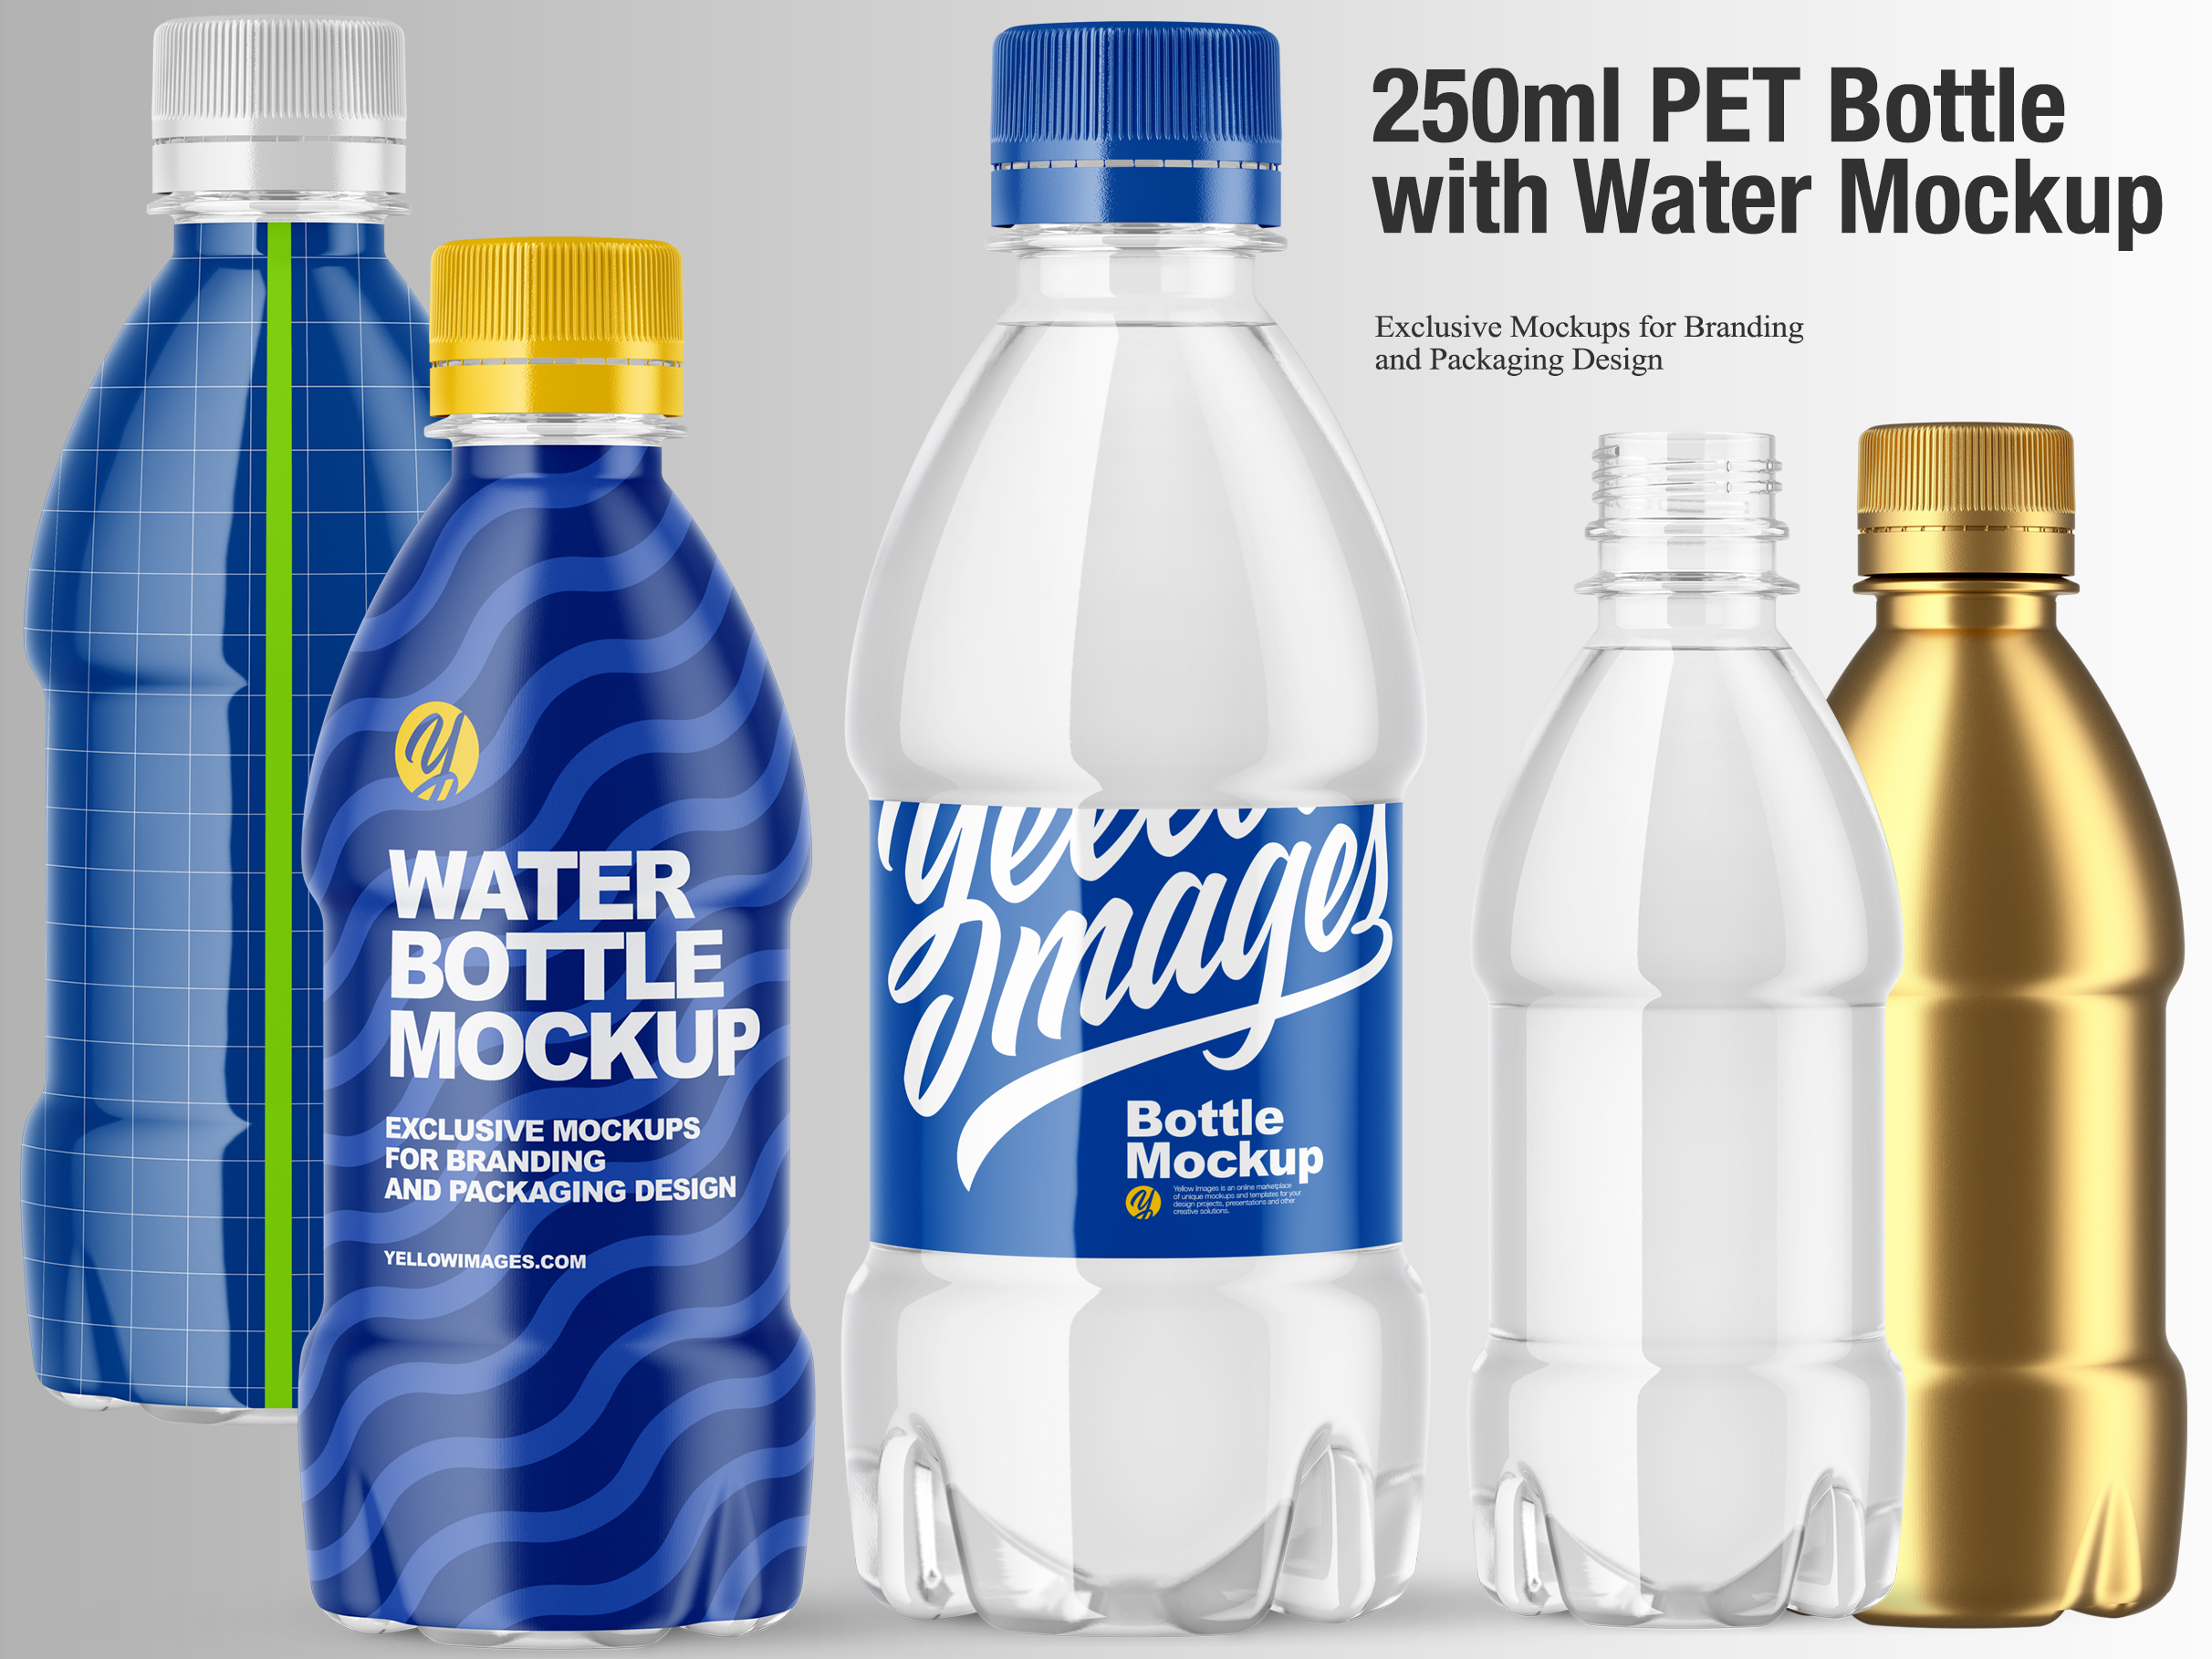 Packaging Plastic Bottle Mockup Download Free And Premium Psd Mockup Templates And Design Assets